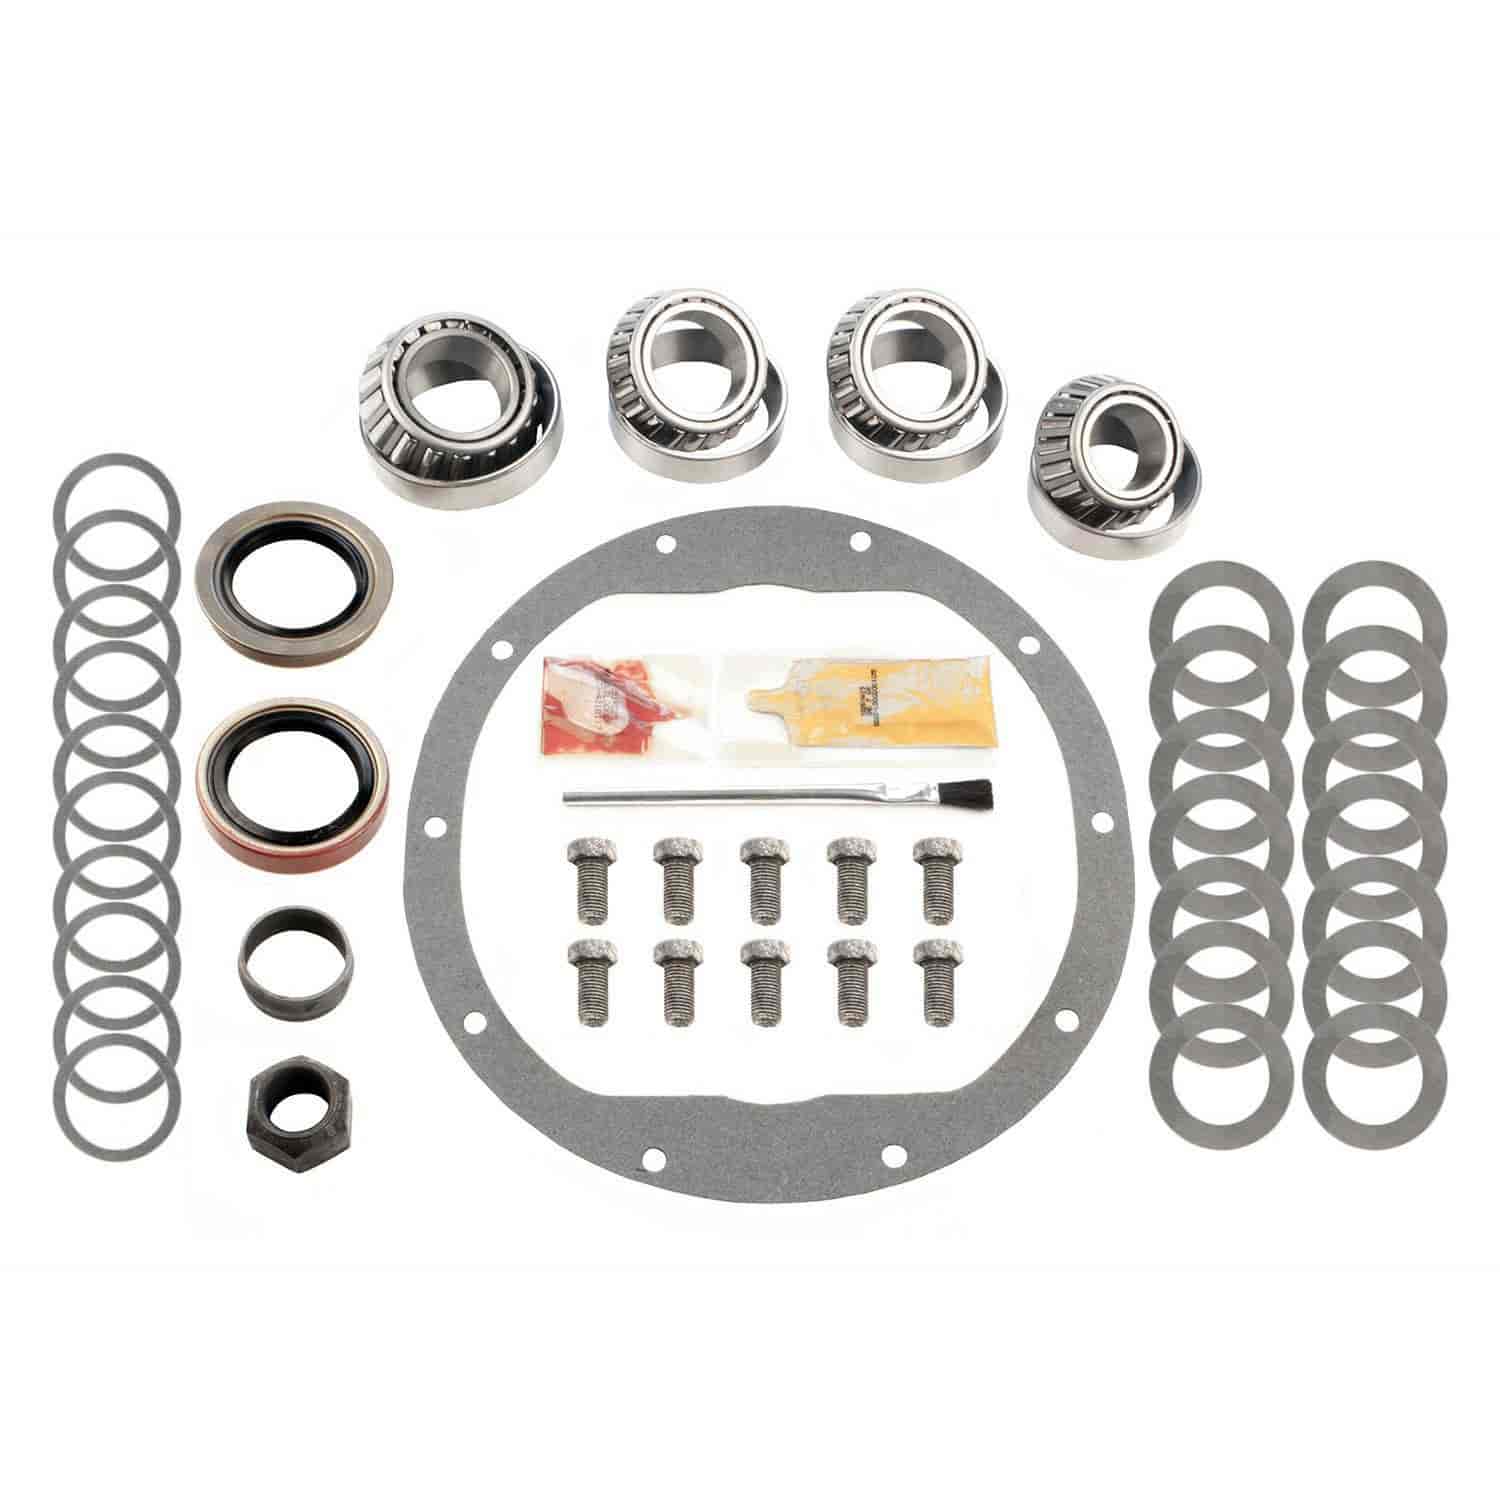 Full Ring & Pinion/Differential Installation Kit